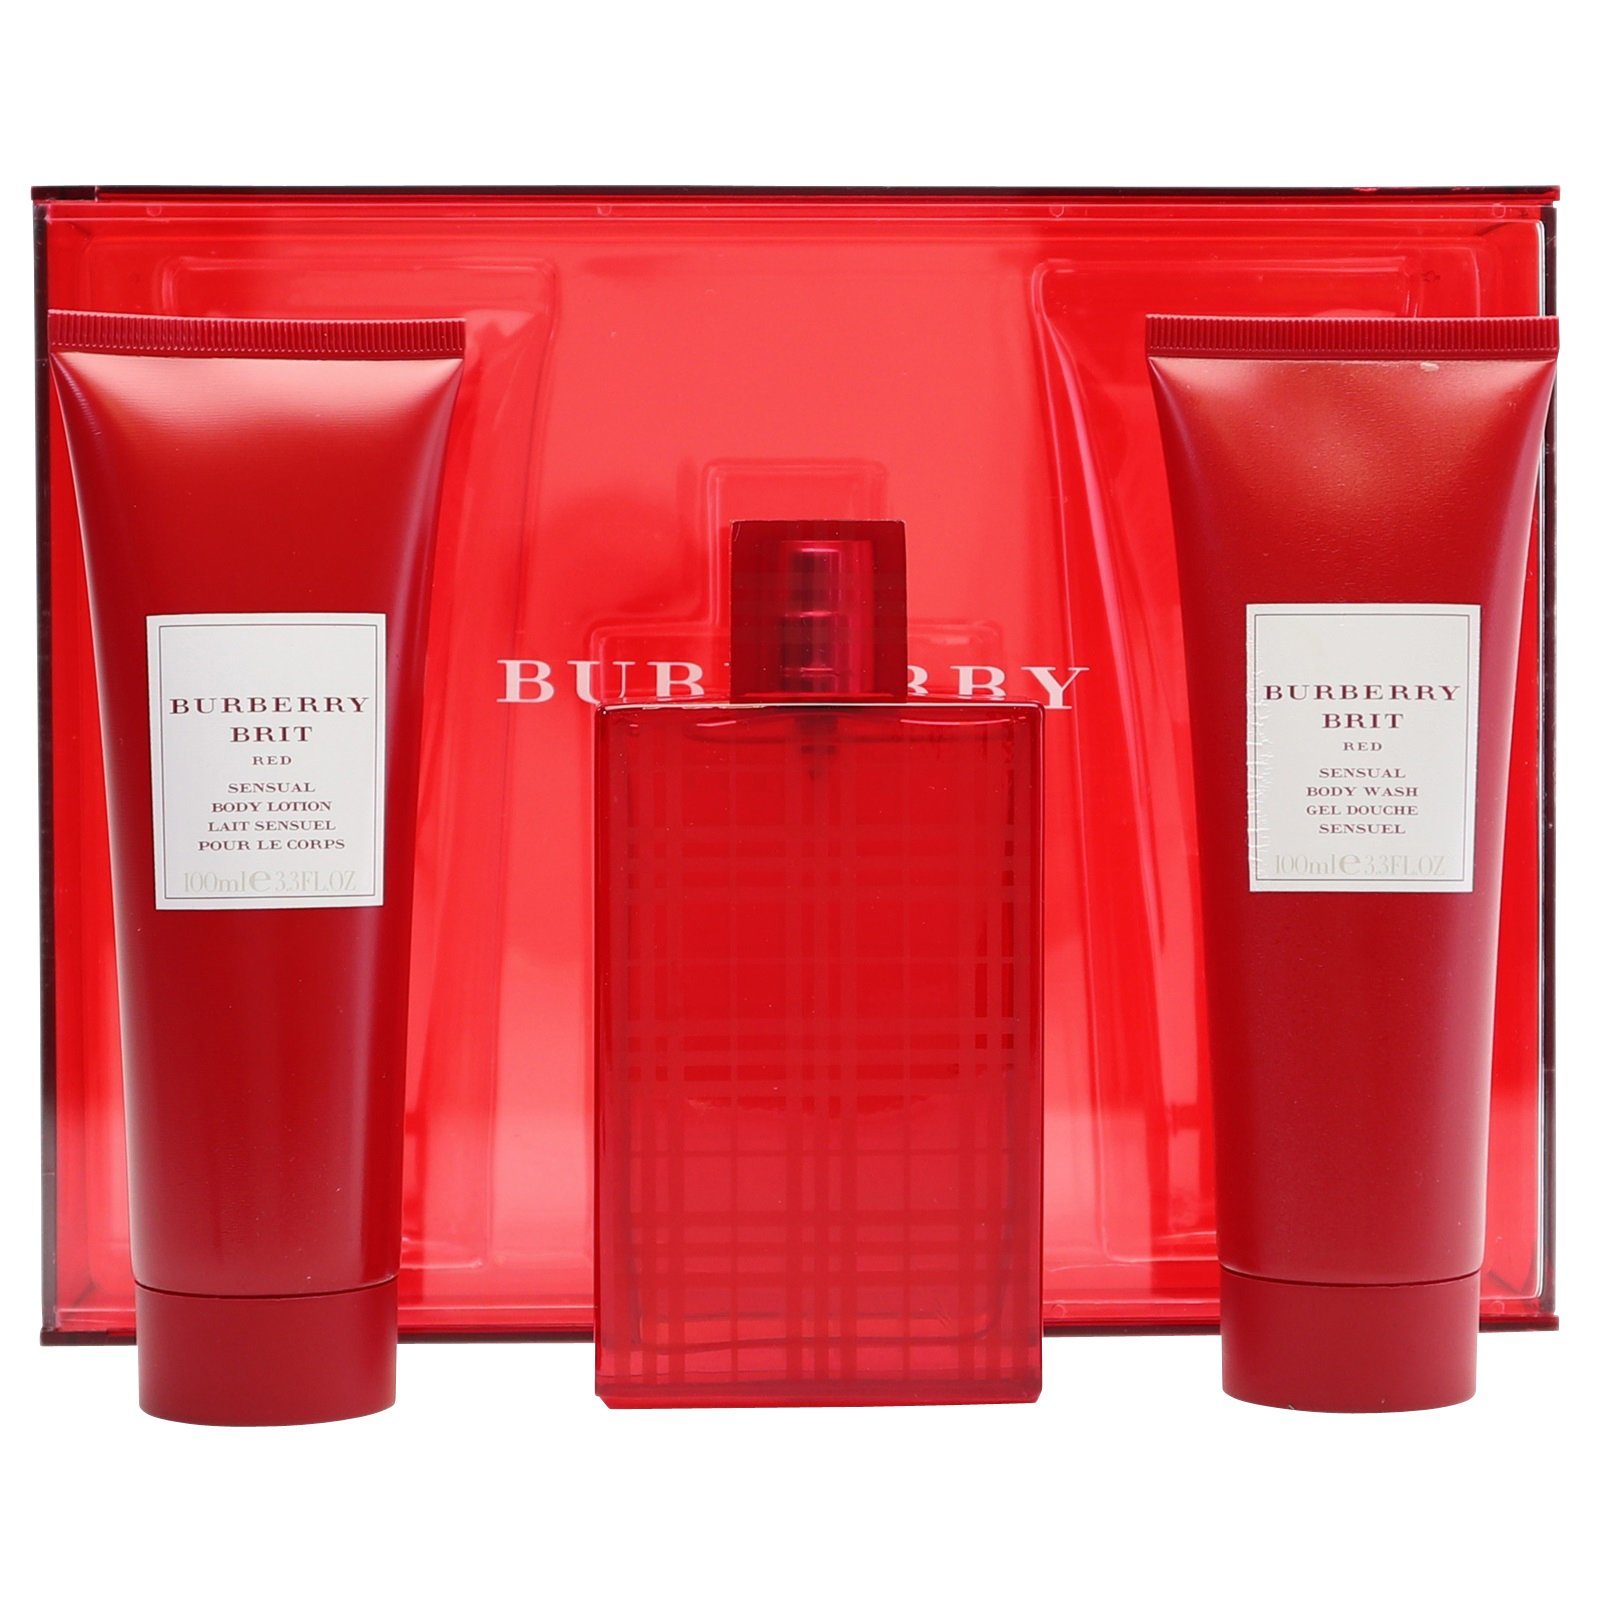 BURBERRY Duft-Set Burberry Brit Red EDP Parfum Spray + Body Wash + Body  Lotion je 100 ml | Duft-Sets